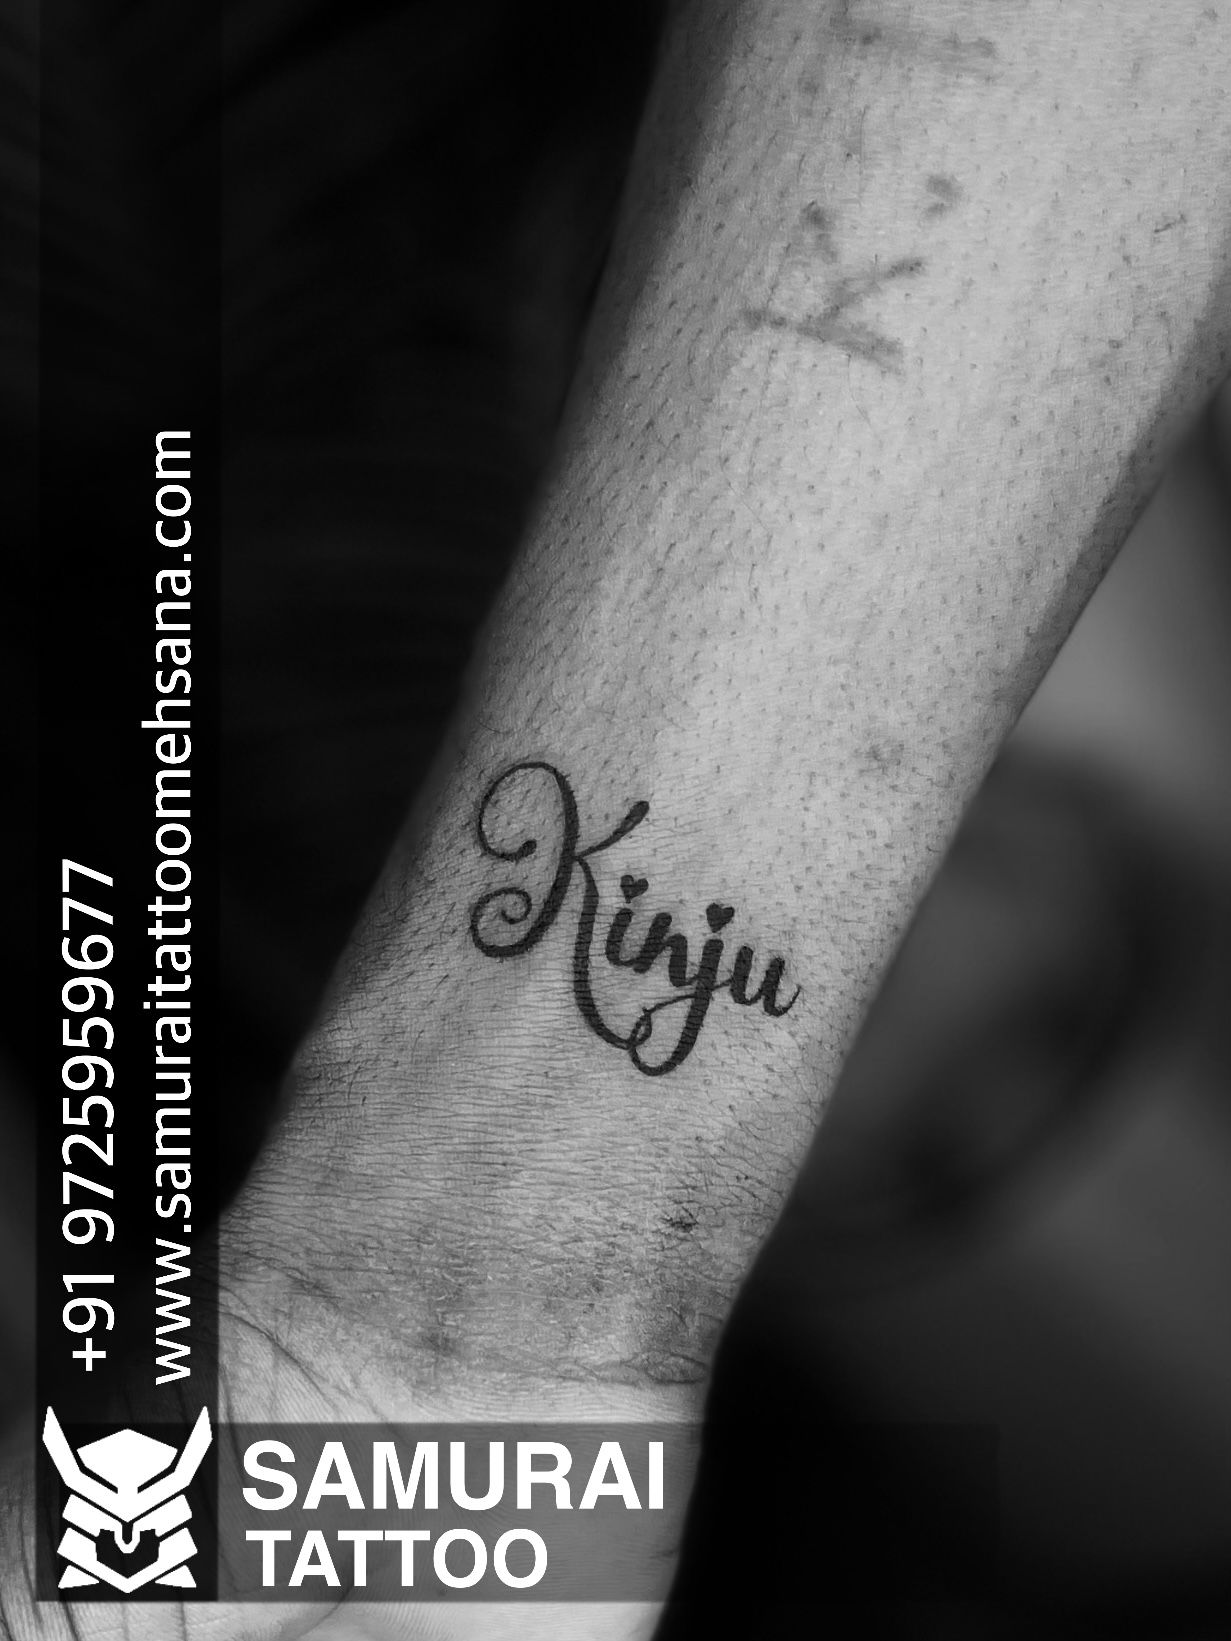 Tattoo uploaded by Vipul Chaudhary • Neel name tattoo |Neel name tattoo  ideas |Neel tattoo • Tattoodo